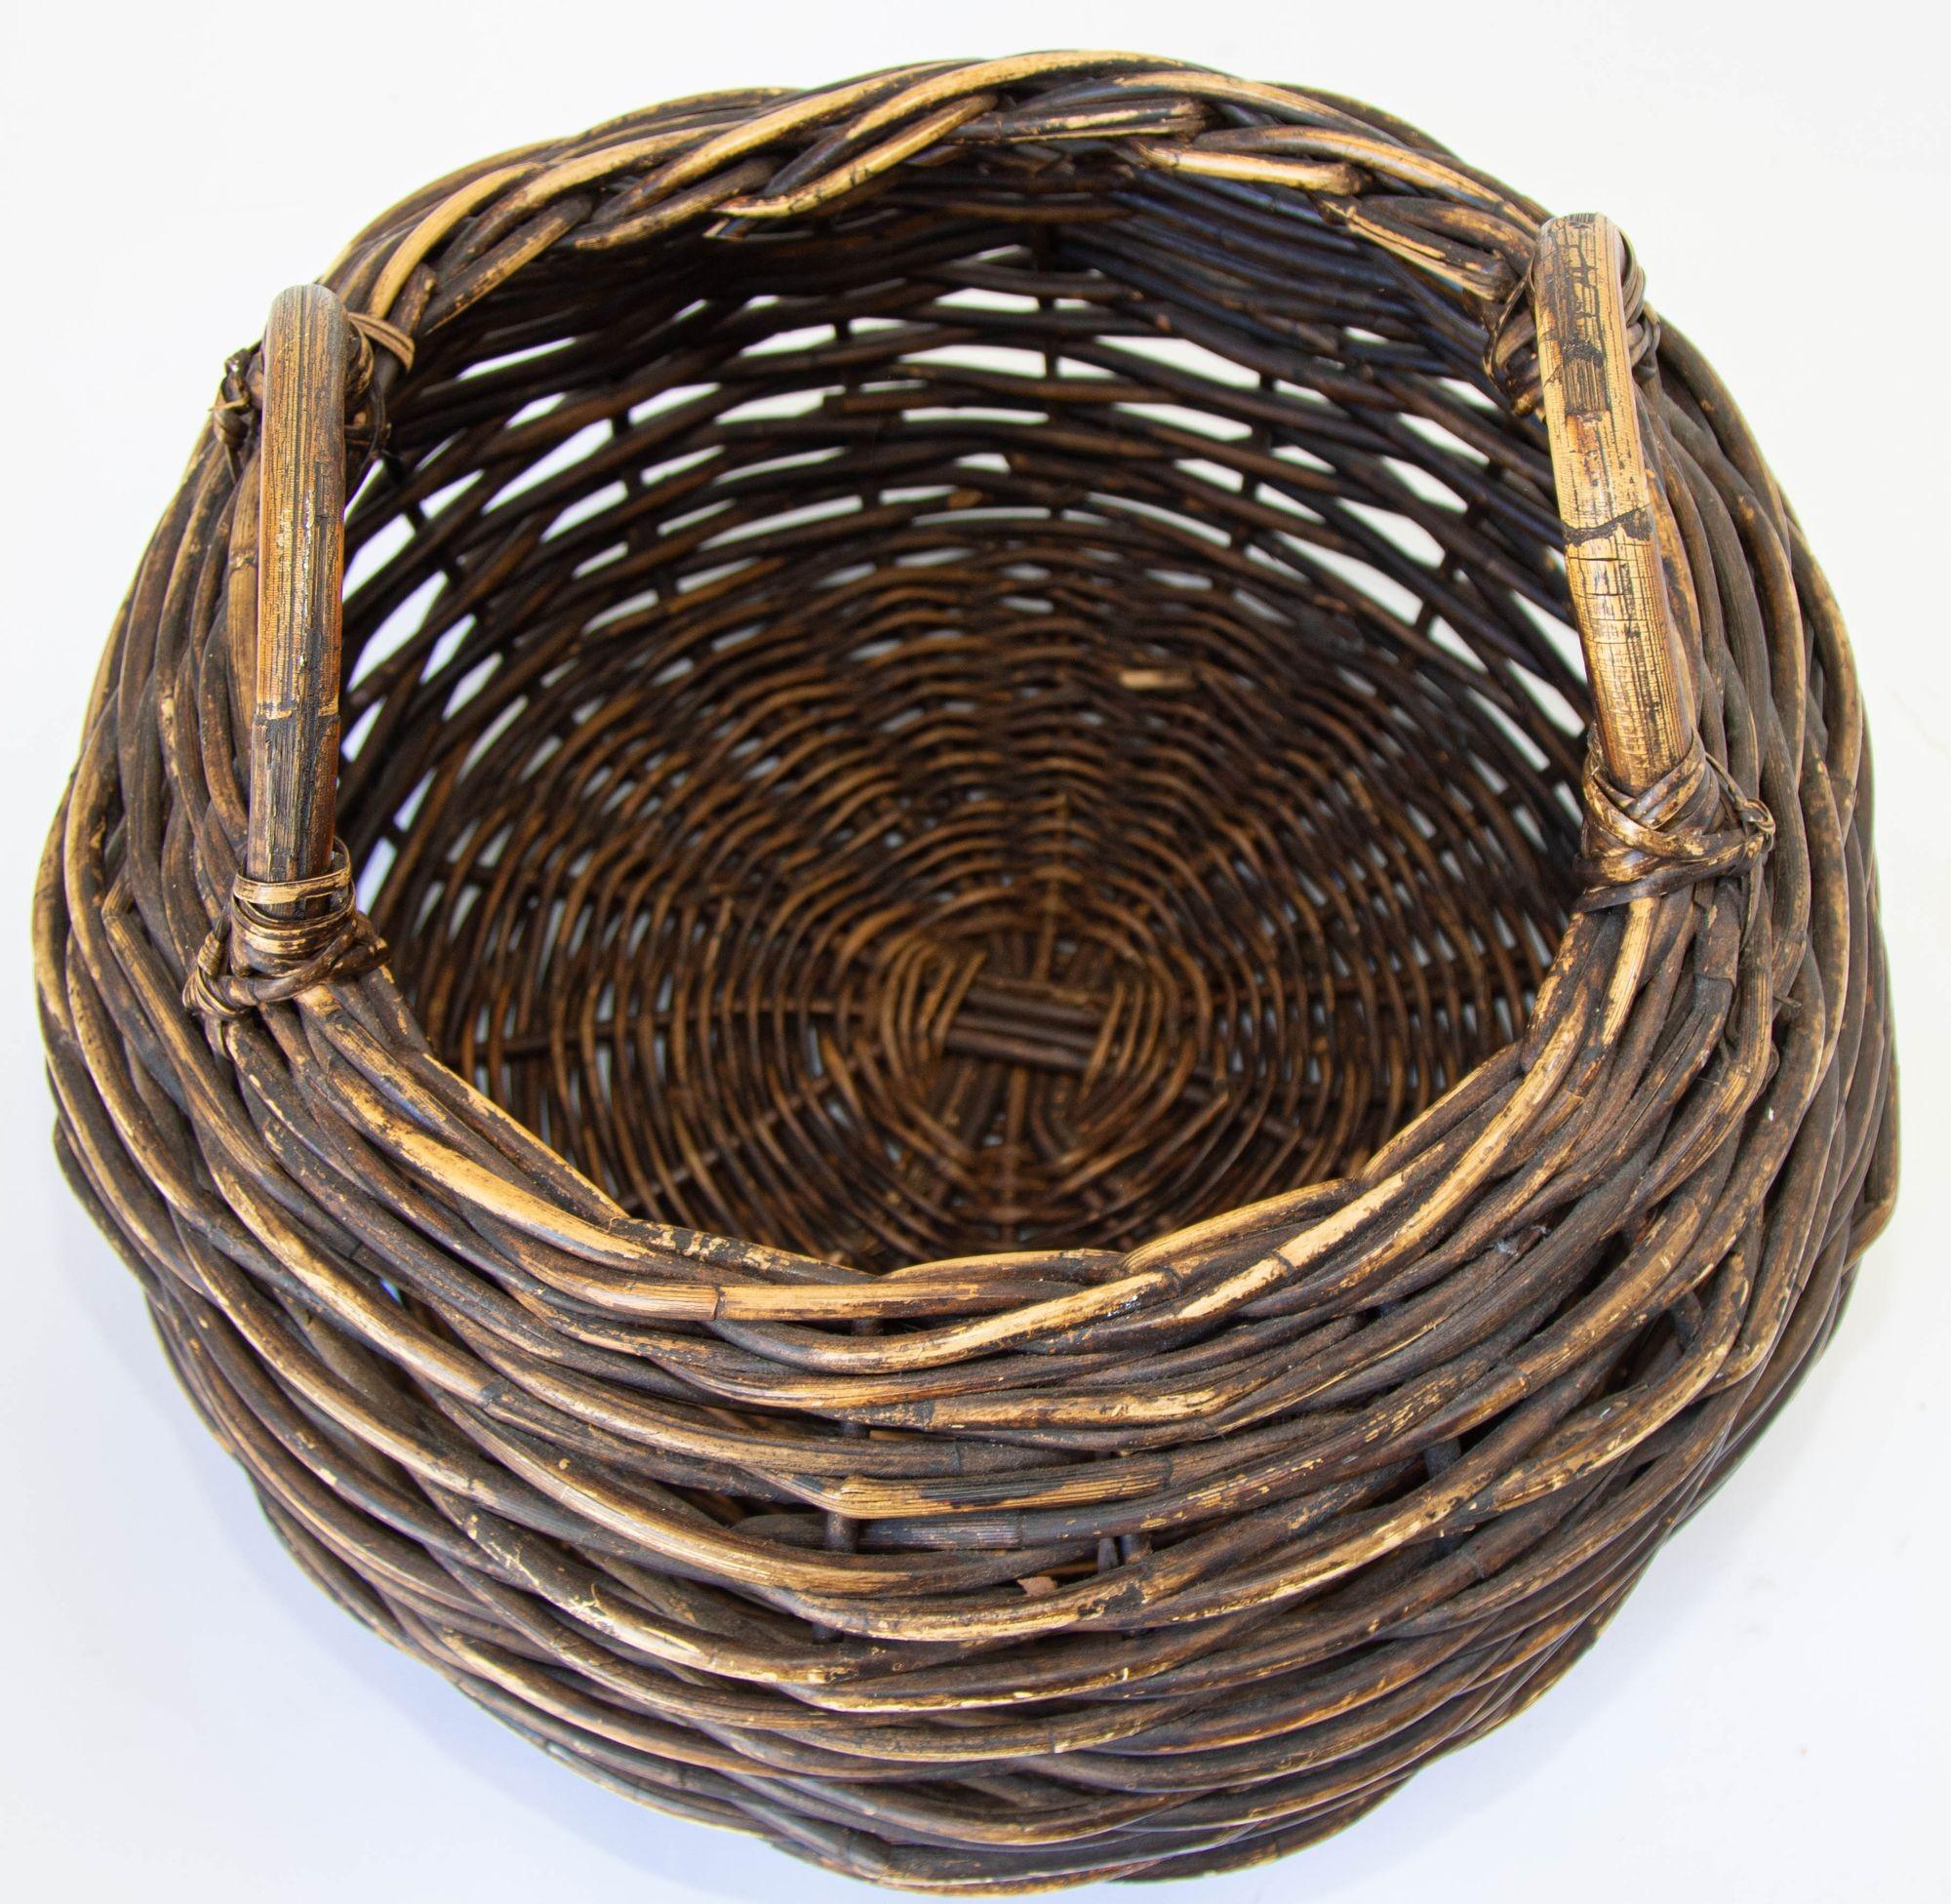 French Provincial Antique French Handwoven Wicker Harvest Basket with Wood Handle